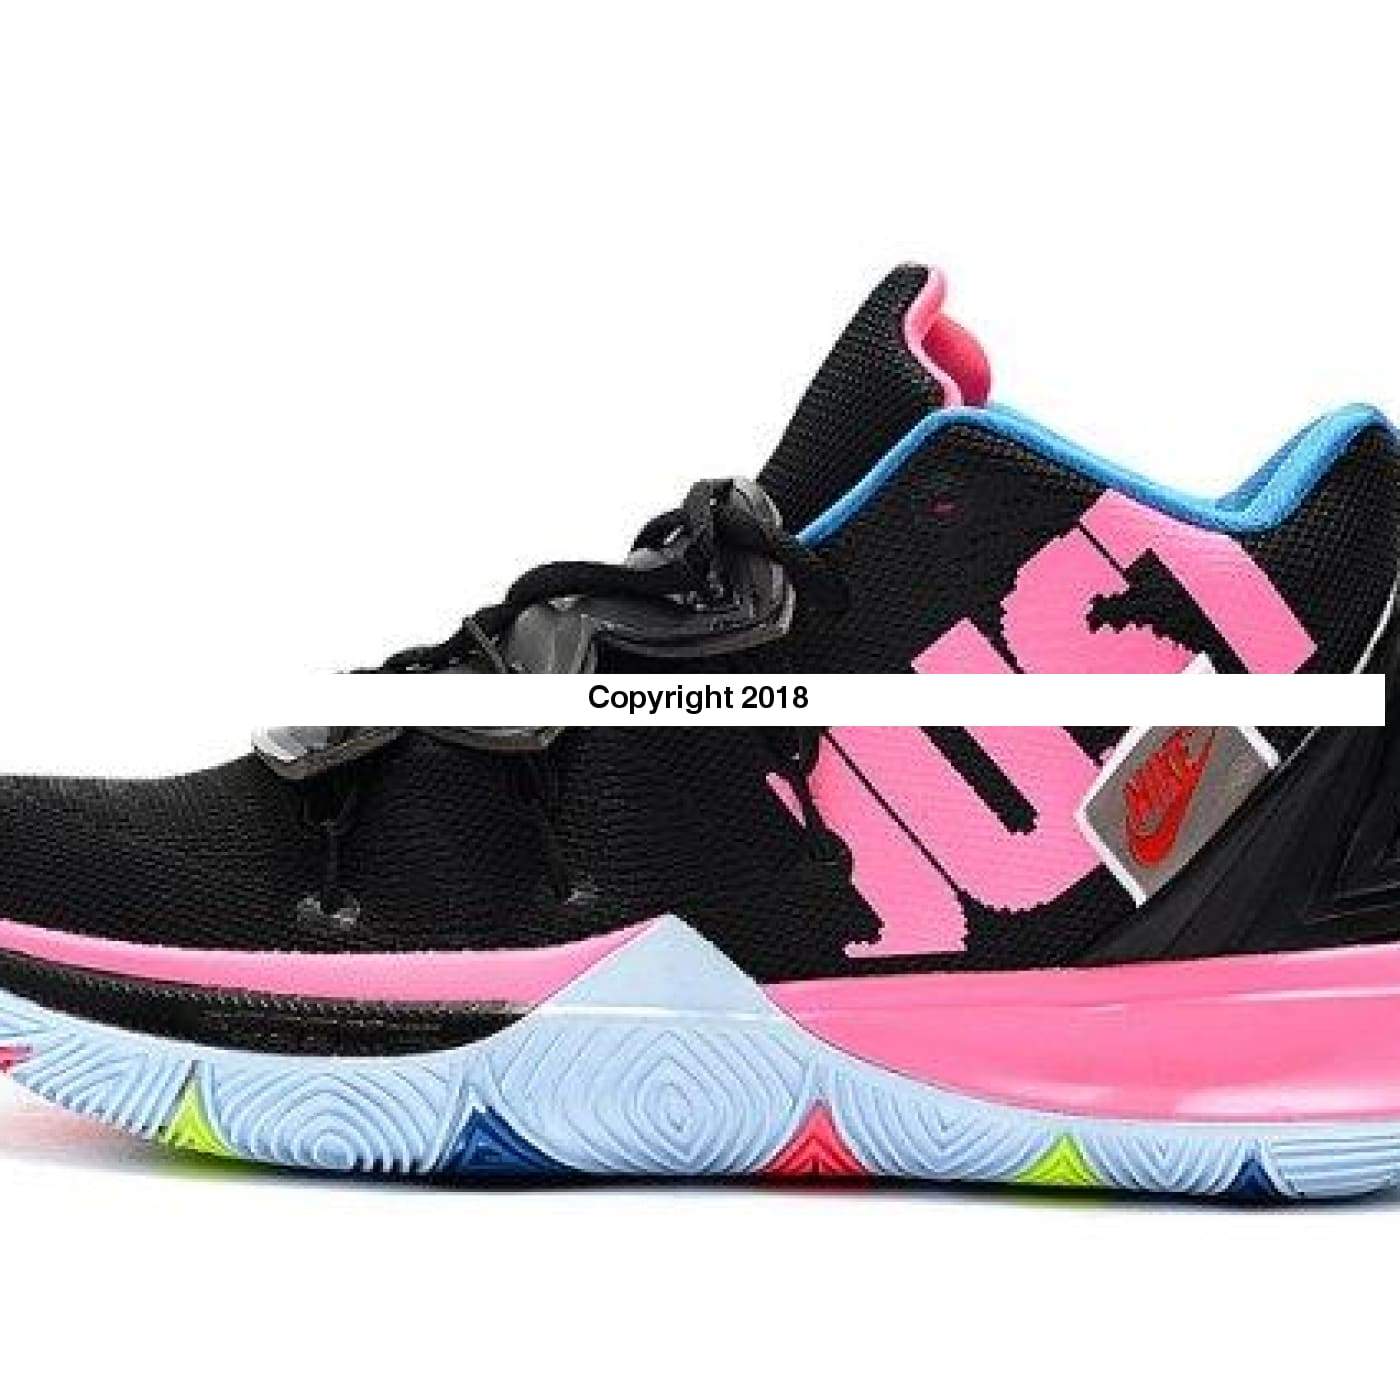 funky basketball shoes